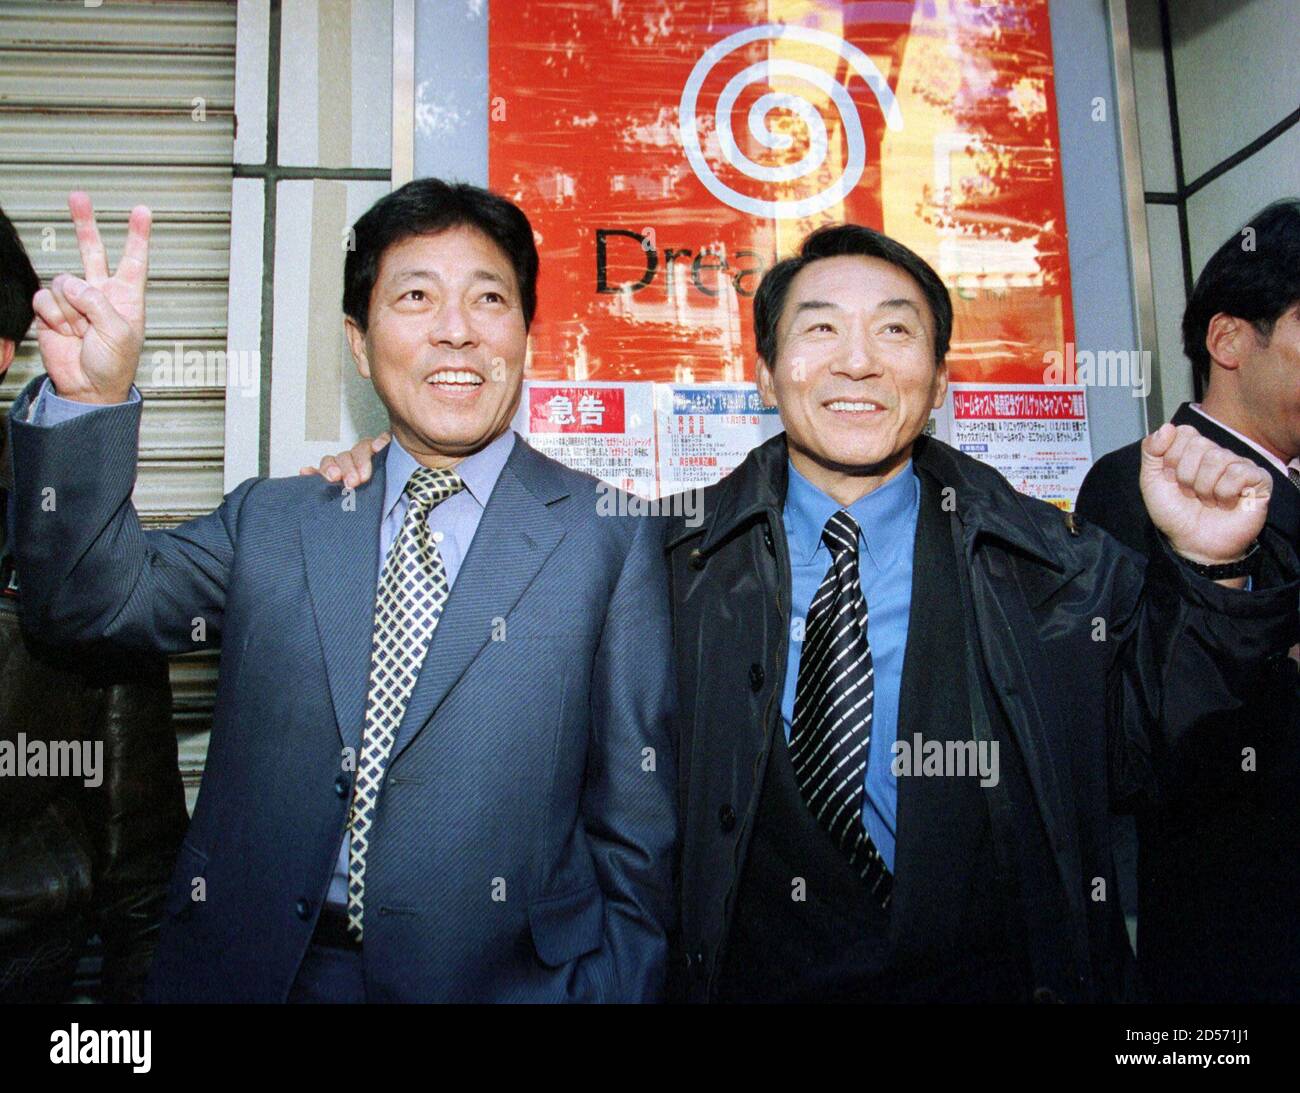 Sega Enterprises President Shoichiro Irimajiri (R) smiles as he and Sega Corporate Vice President Hidekazu Yukawa, wait for a computer game specialty shop to open for the start of sales of Sega's new Dreamcast game player in Tokyo's Akihabara electronics district November 27. The game player hit store shelves in Japan with a fanfare as the "PlayStation killer". Sega hopes that the new 128-bit, Internet-capable games player, will help it win back its lost market share.  ES/TAN/KM Stock Photo